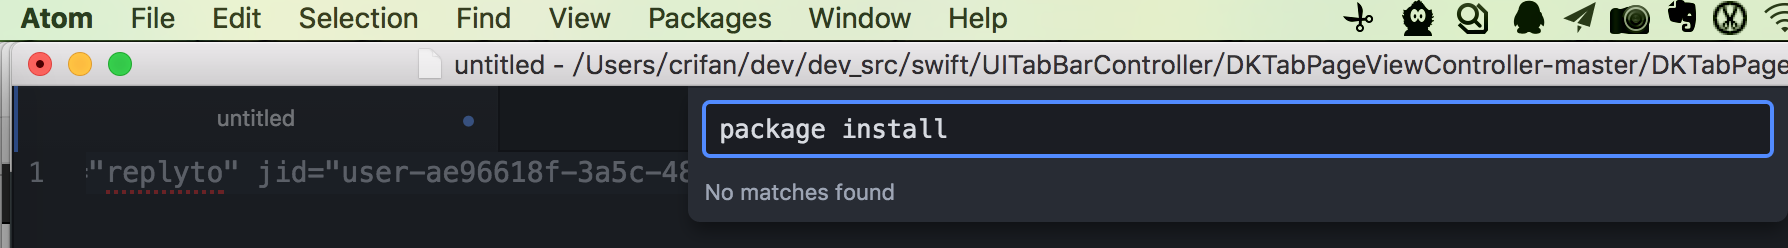 mac atom not found Package install